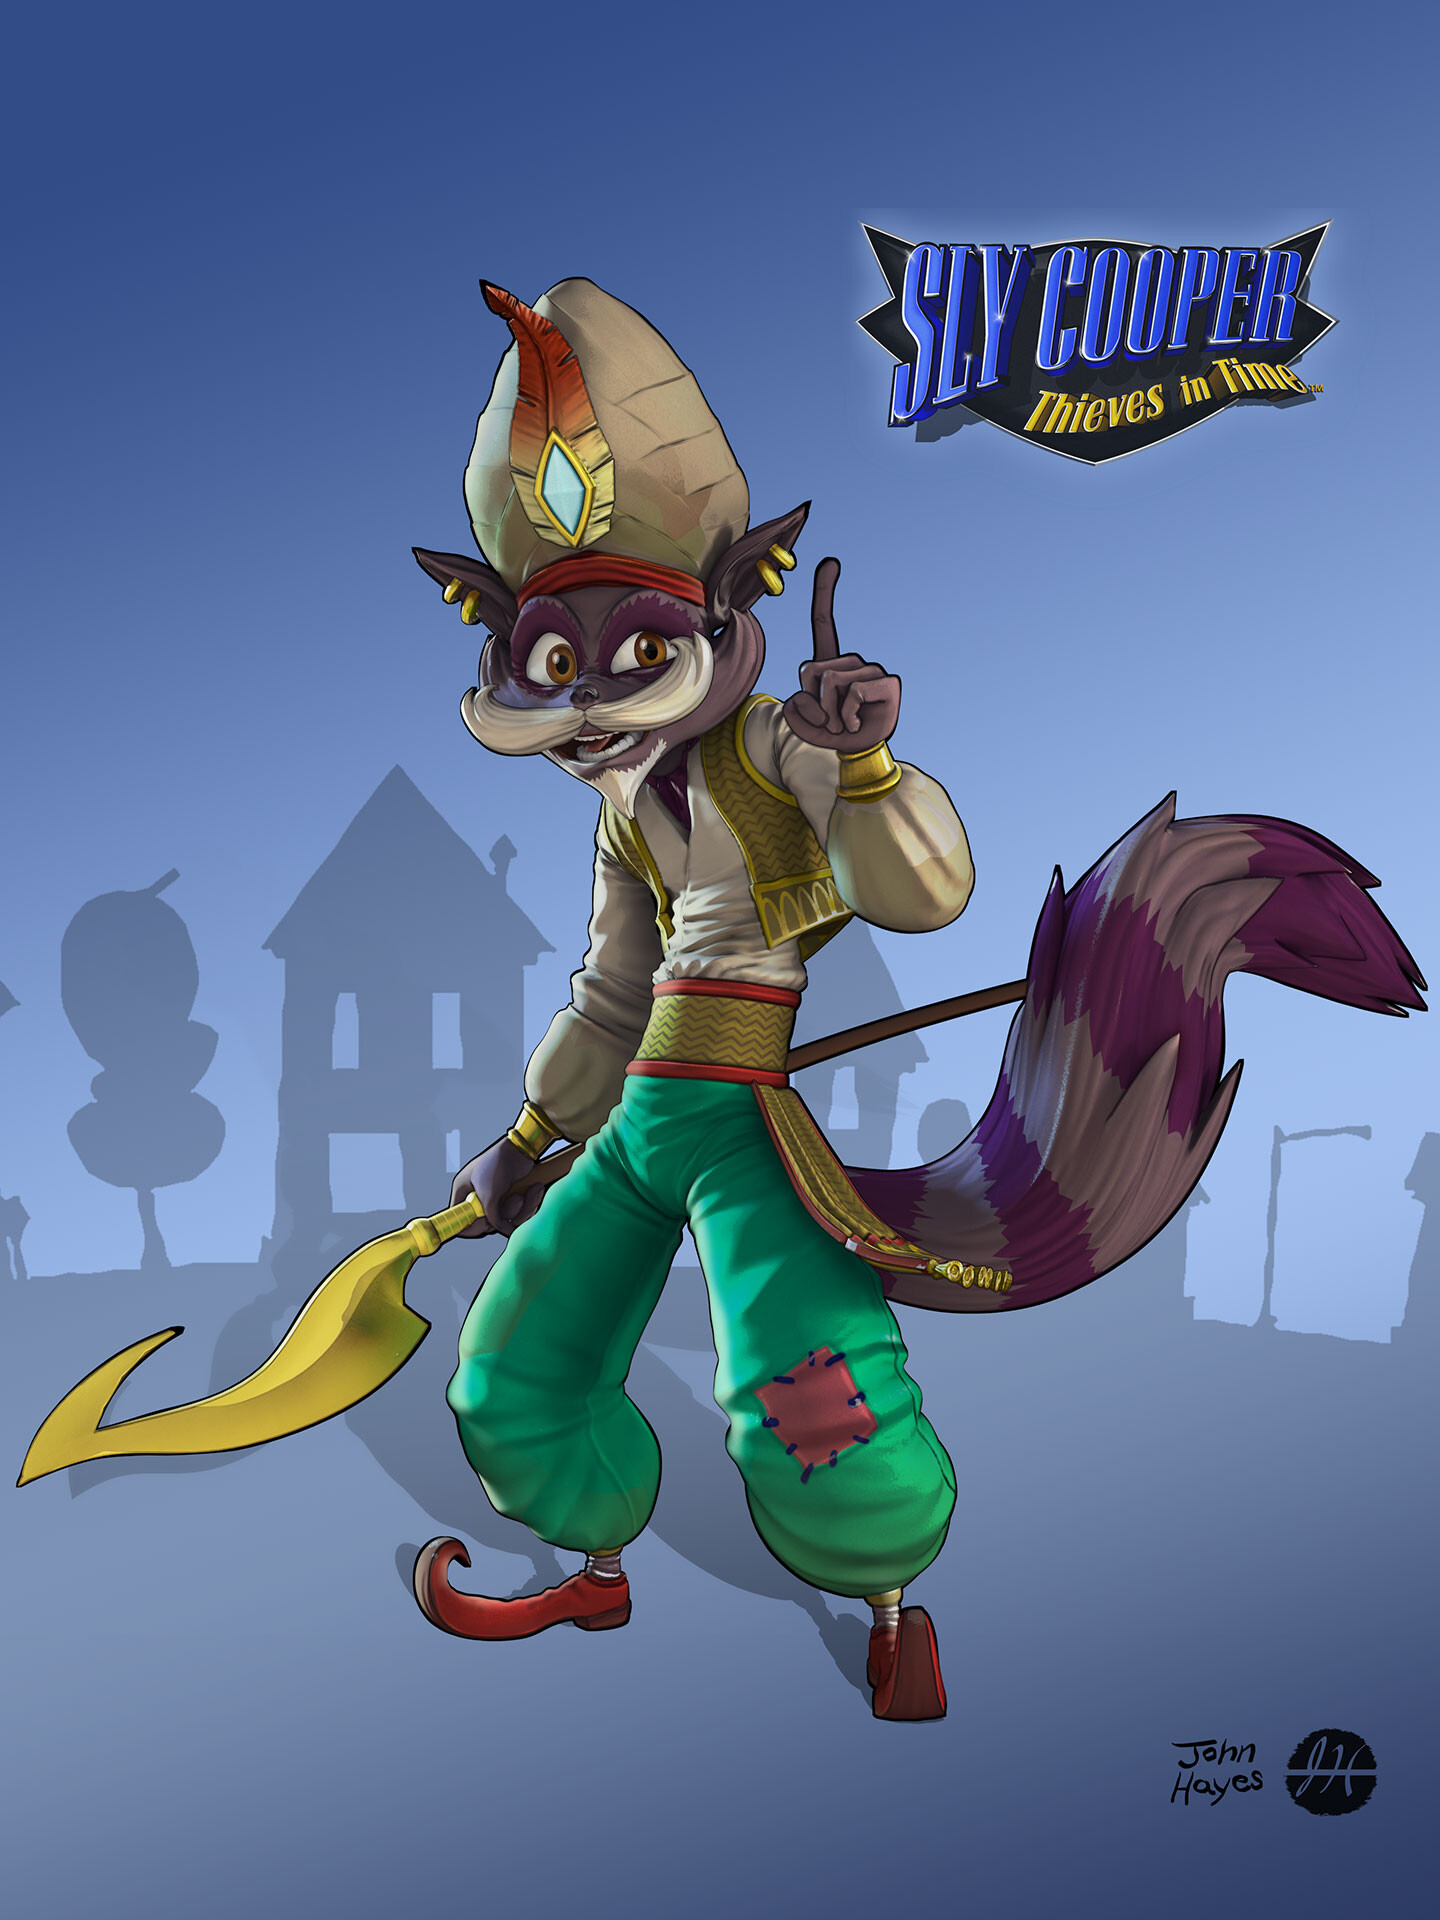 ArtStation - Sir Galleth, from the game Sly Cooper: Thieves in Time